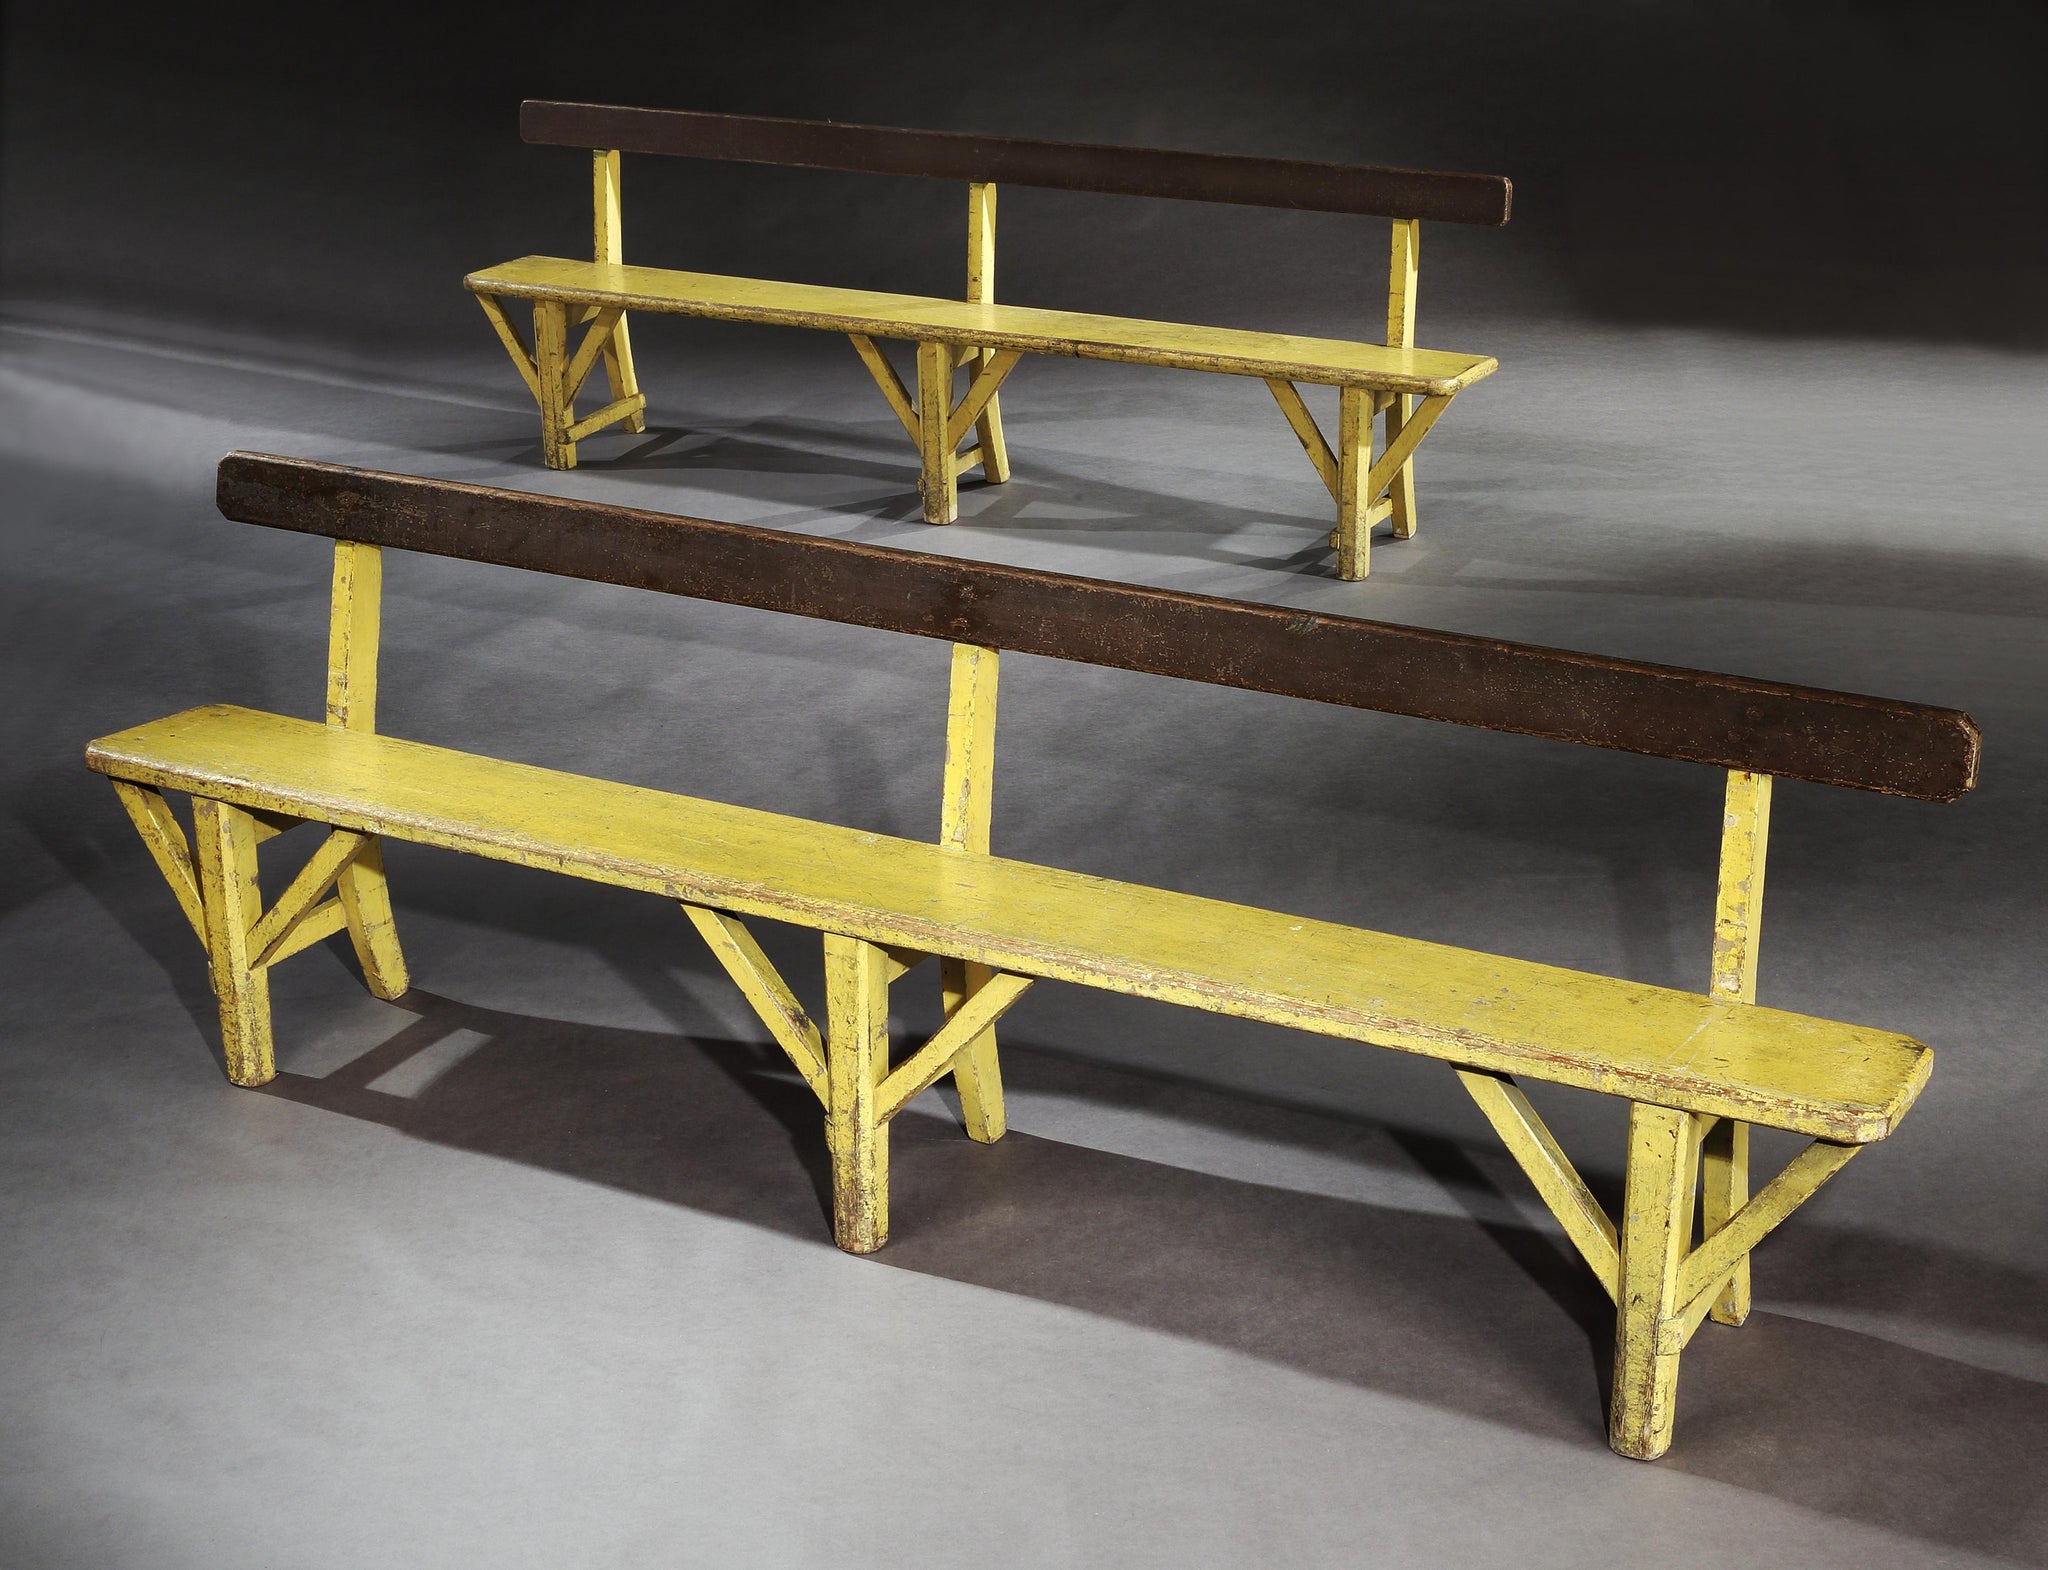 Two Unusually Graphic Single Plank Bench Seats